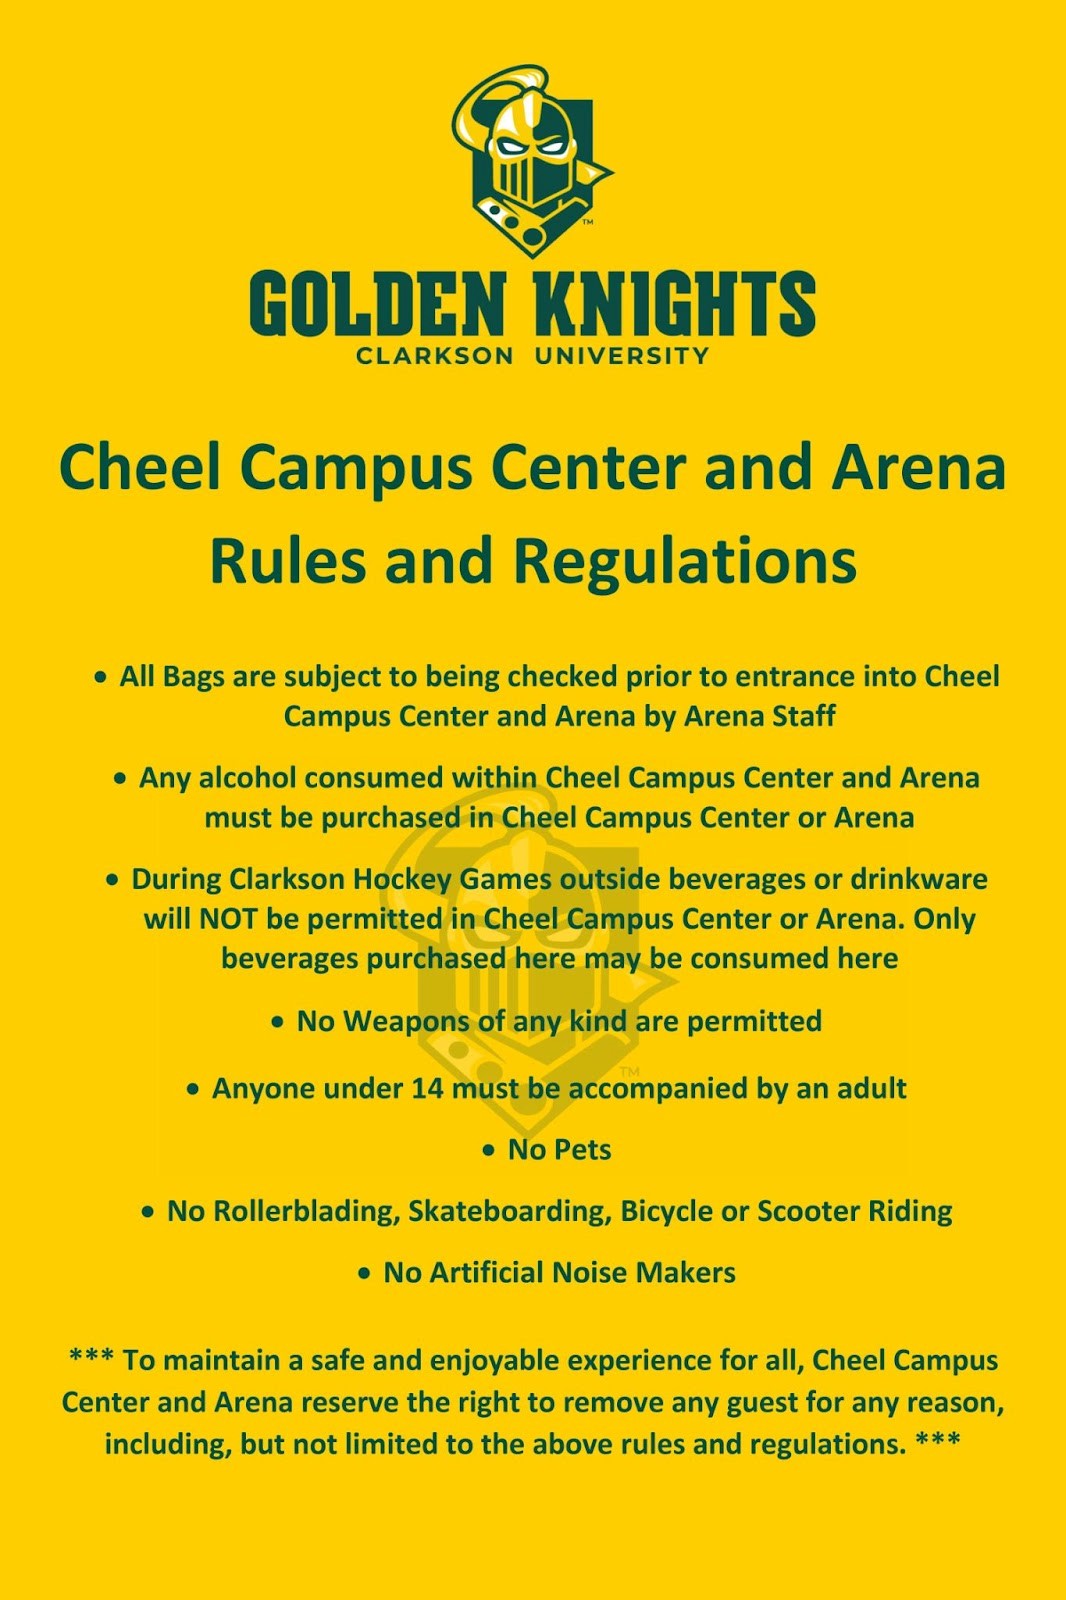 Updated Cheel Campus Center Rules and Regulations